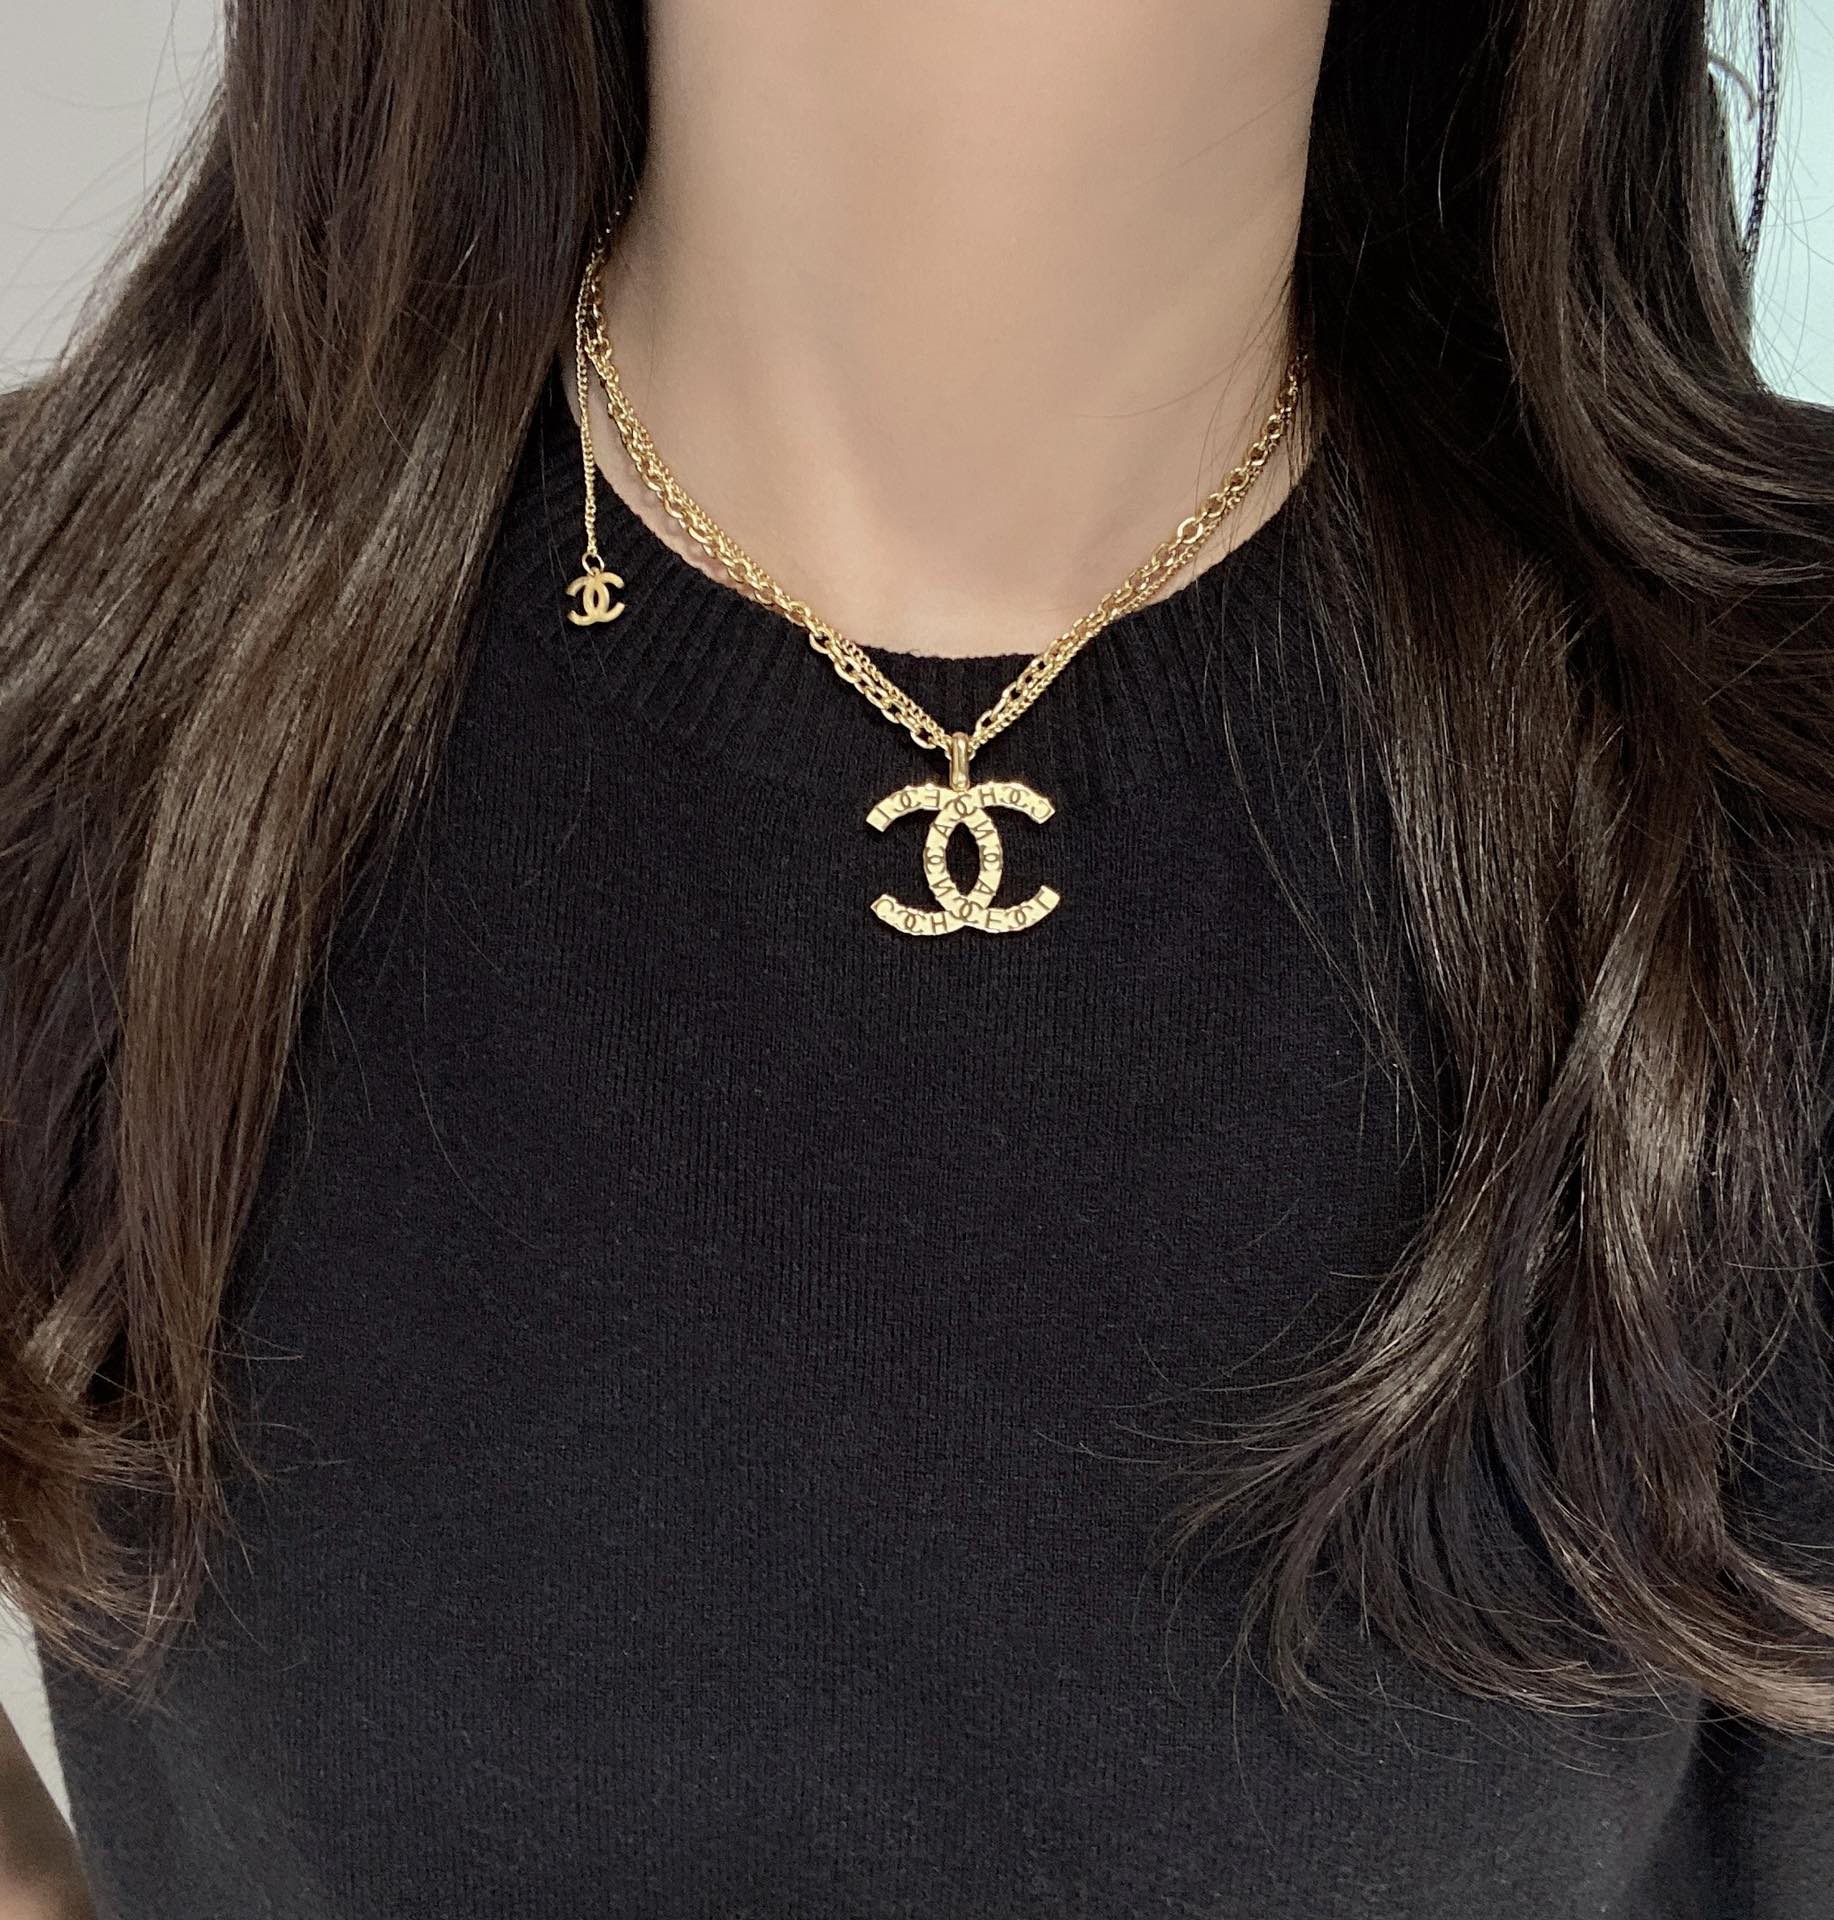 X483  Chanel necklace 110489